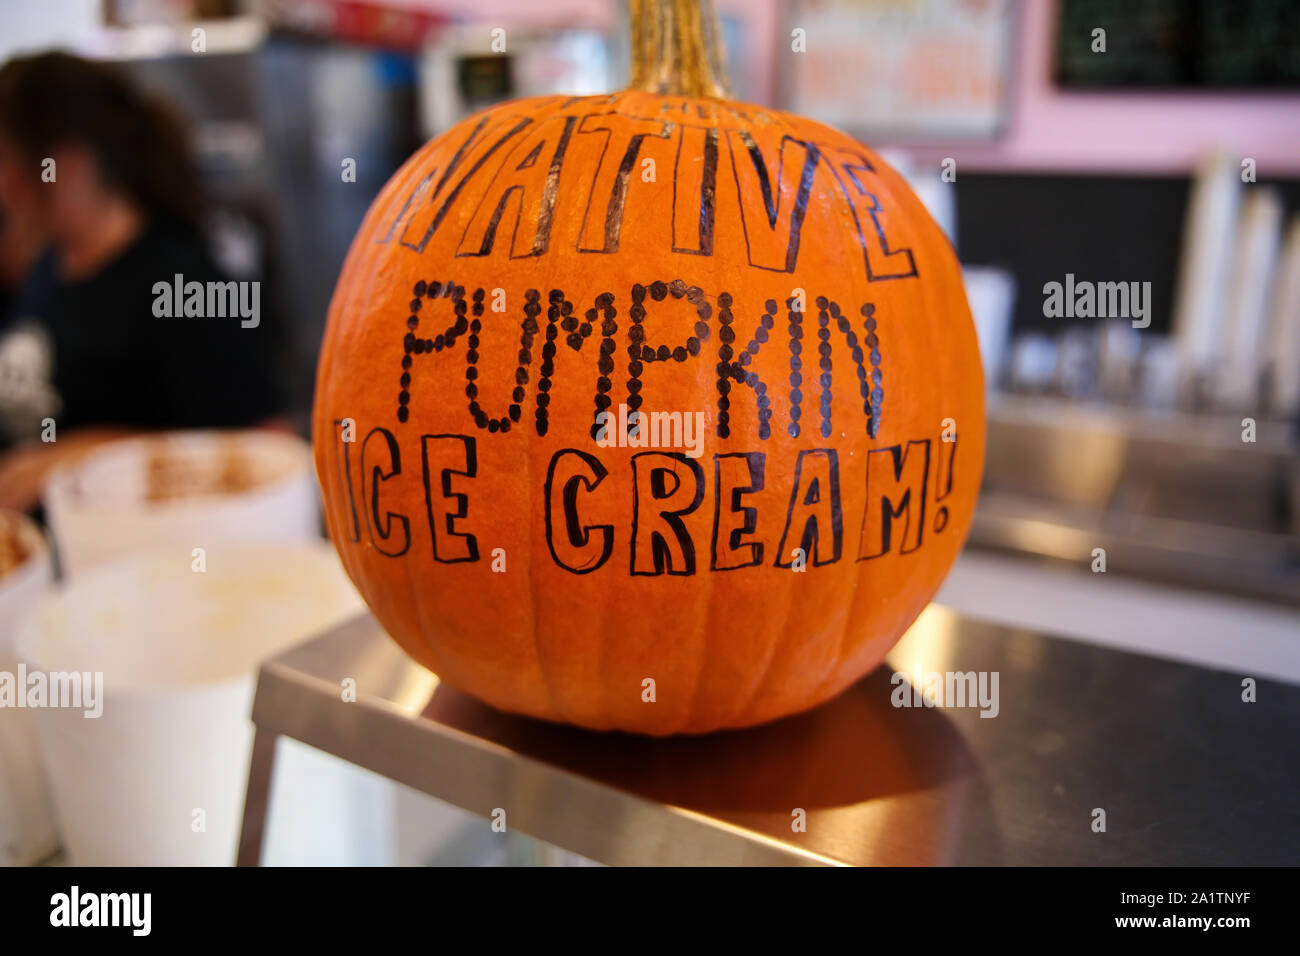 Pumpkin at store with a native flavored ice cream adverstising message. Stock Photo